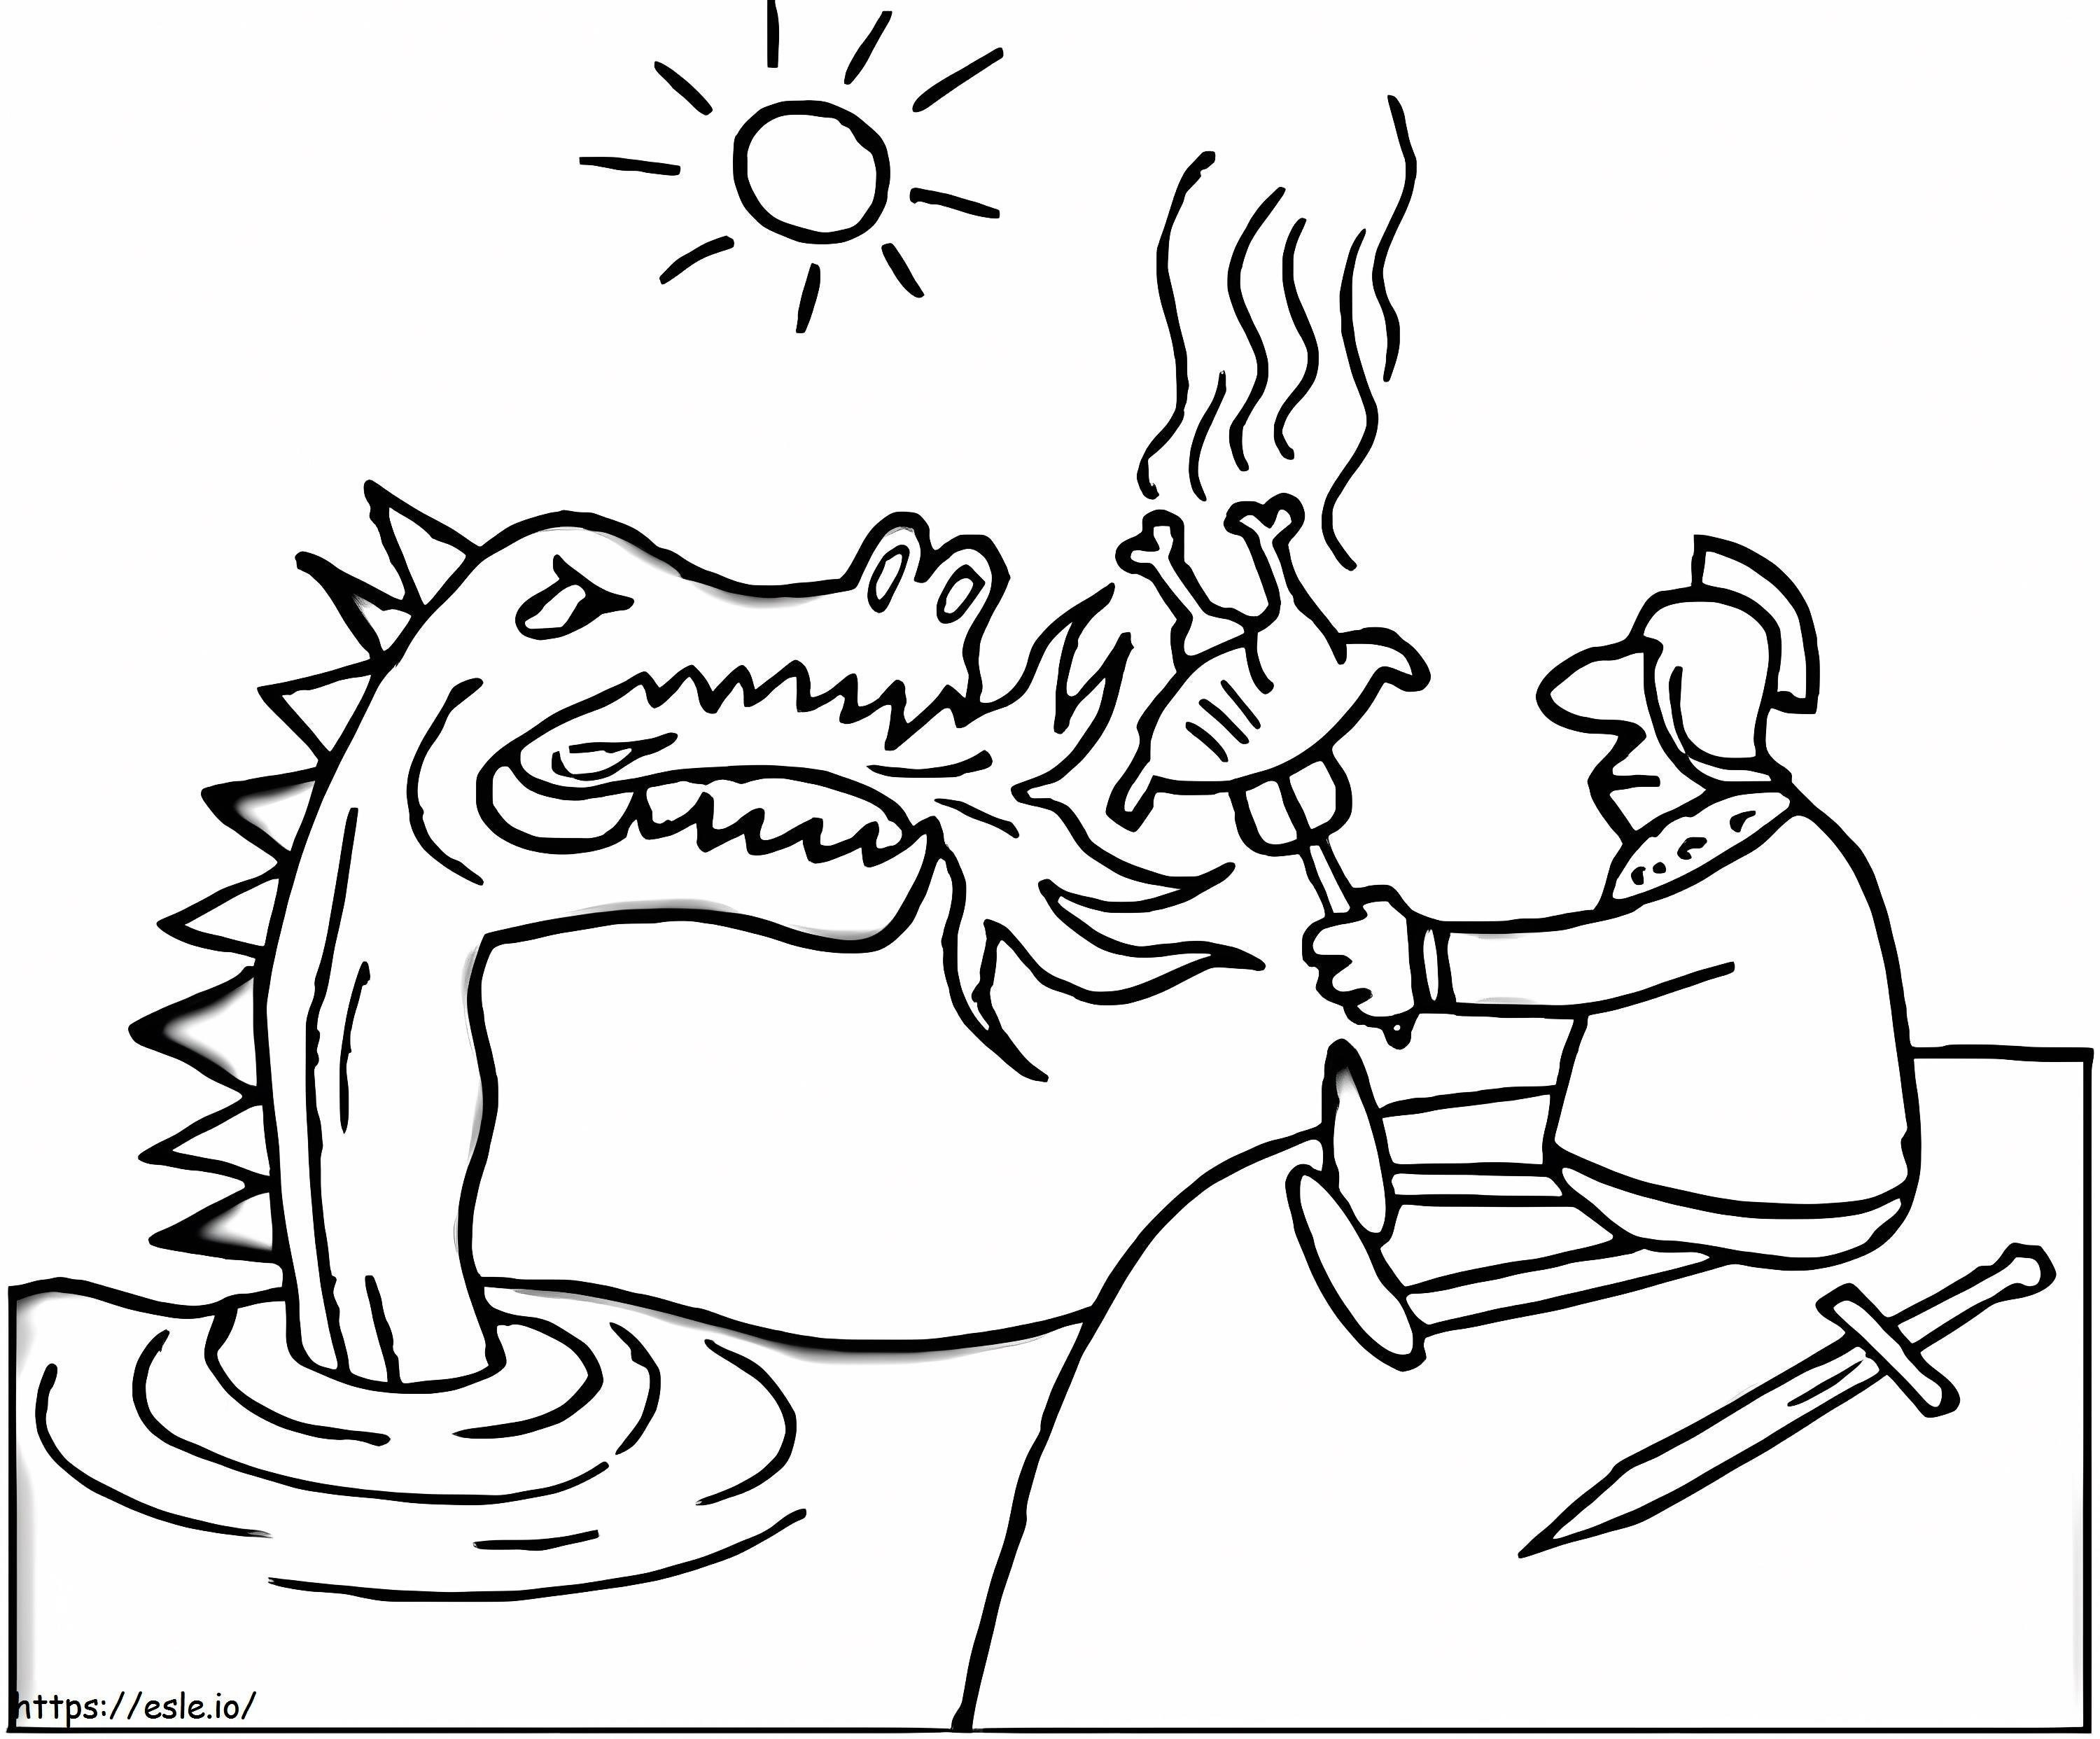 Funny Knight And Dragon coloring page